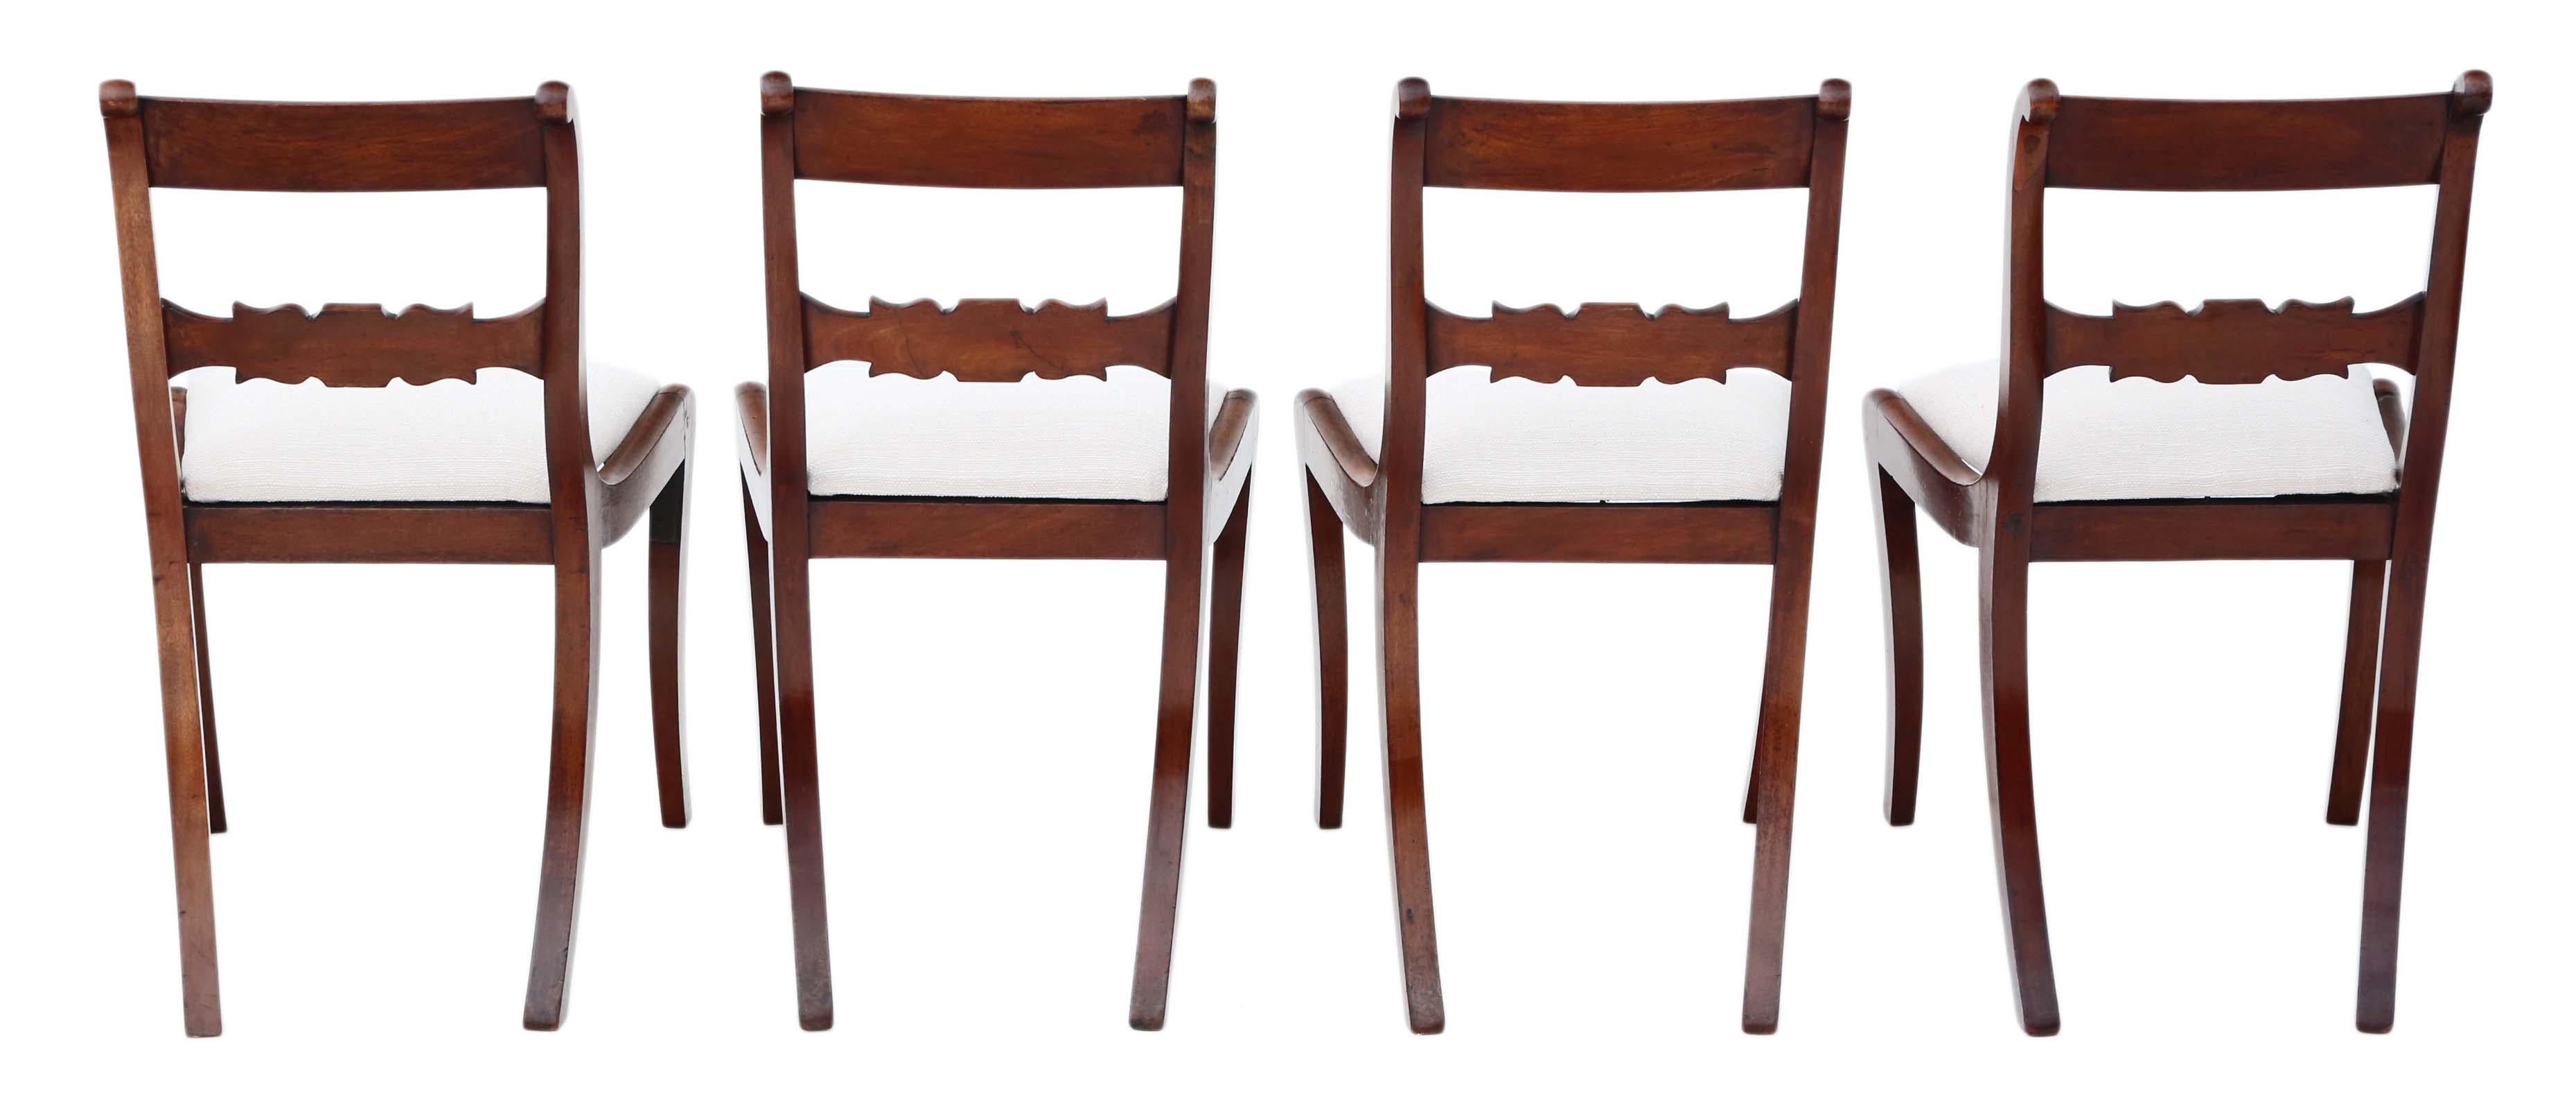 Antique quality set of 4 Regency mahogany dining chairs.

Date from circa 1825 with great sabre legs. A very rare find.

Solid, with no loose joints and no woodworm.

New upholstery in a heavy weight upholstery fabric, with an off-white